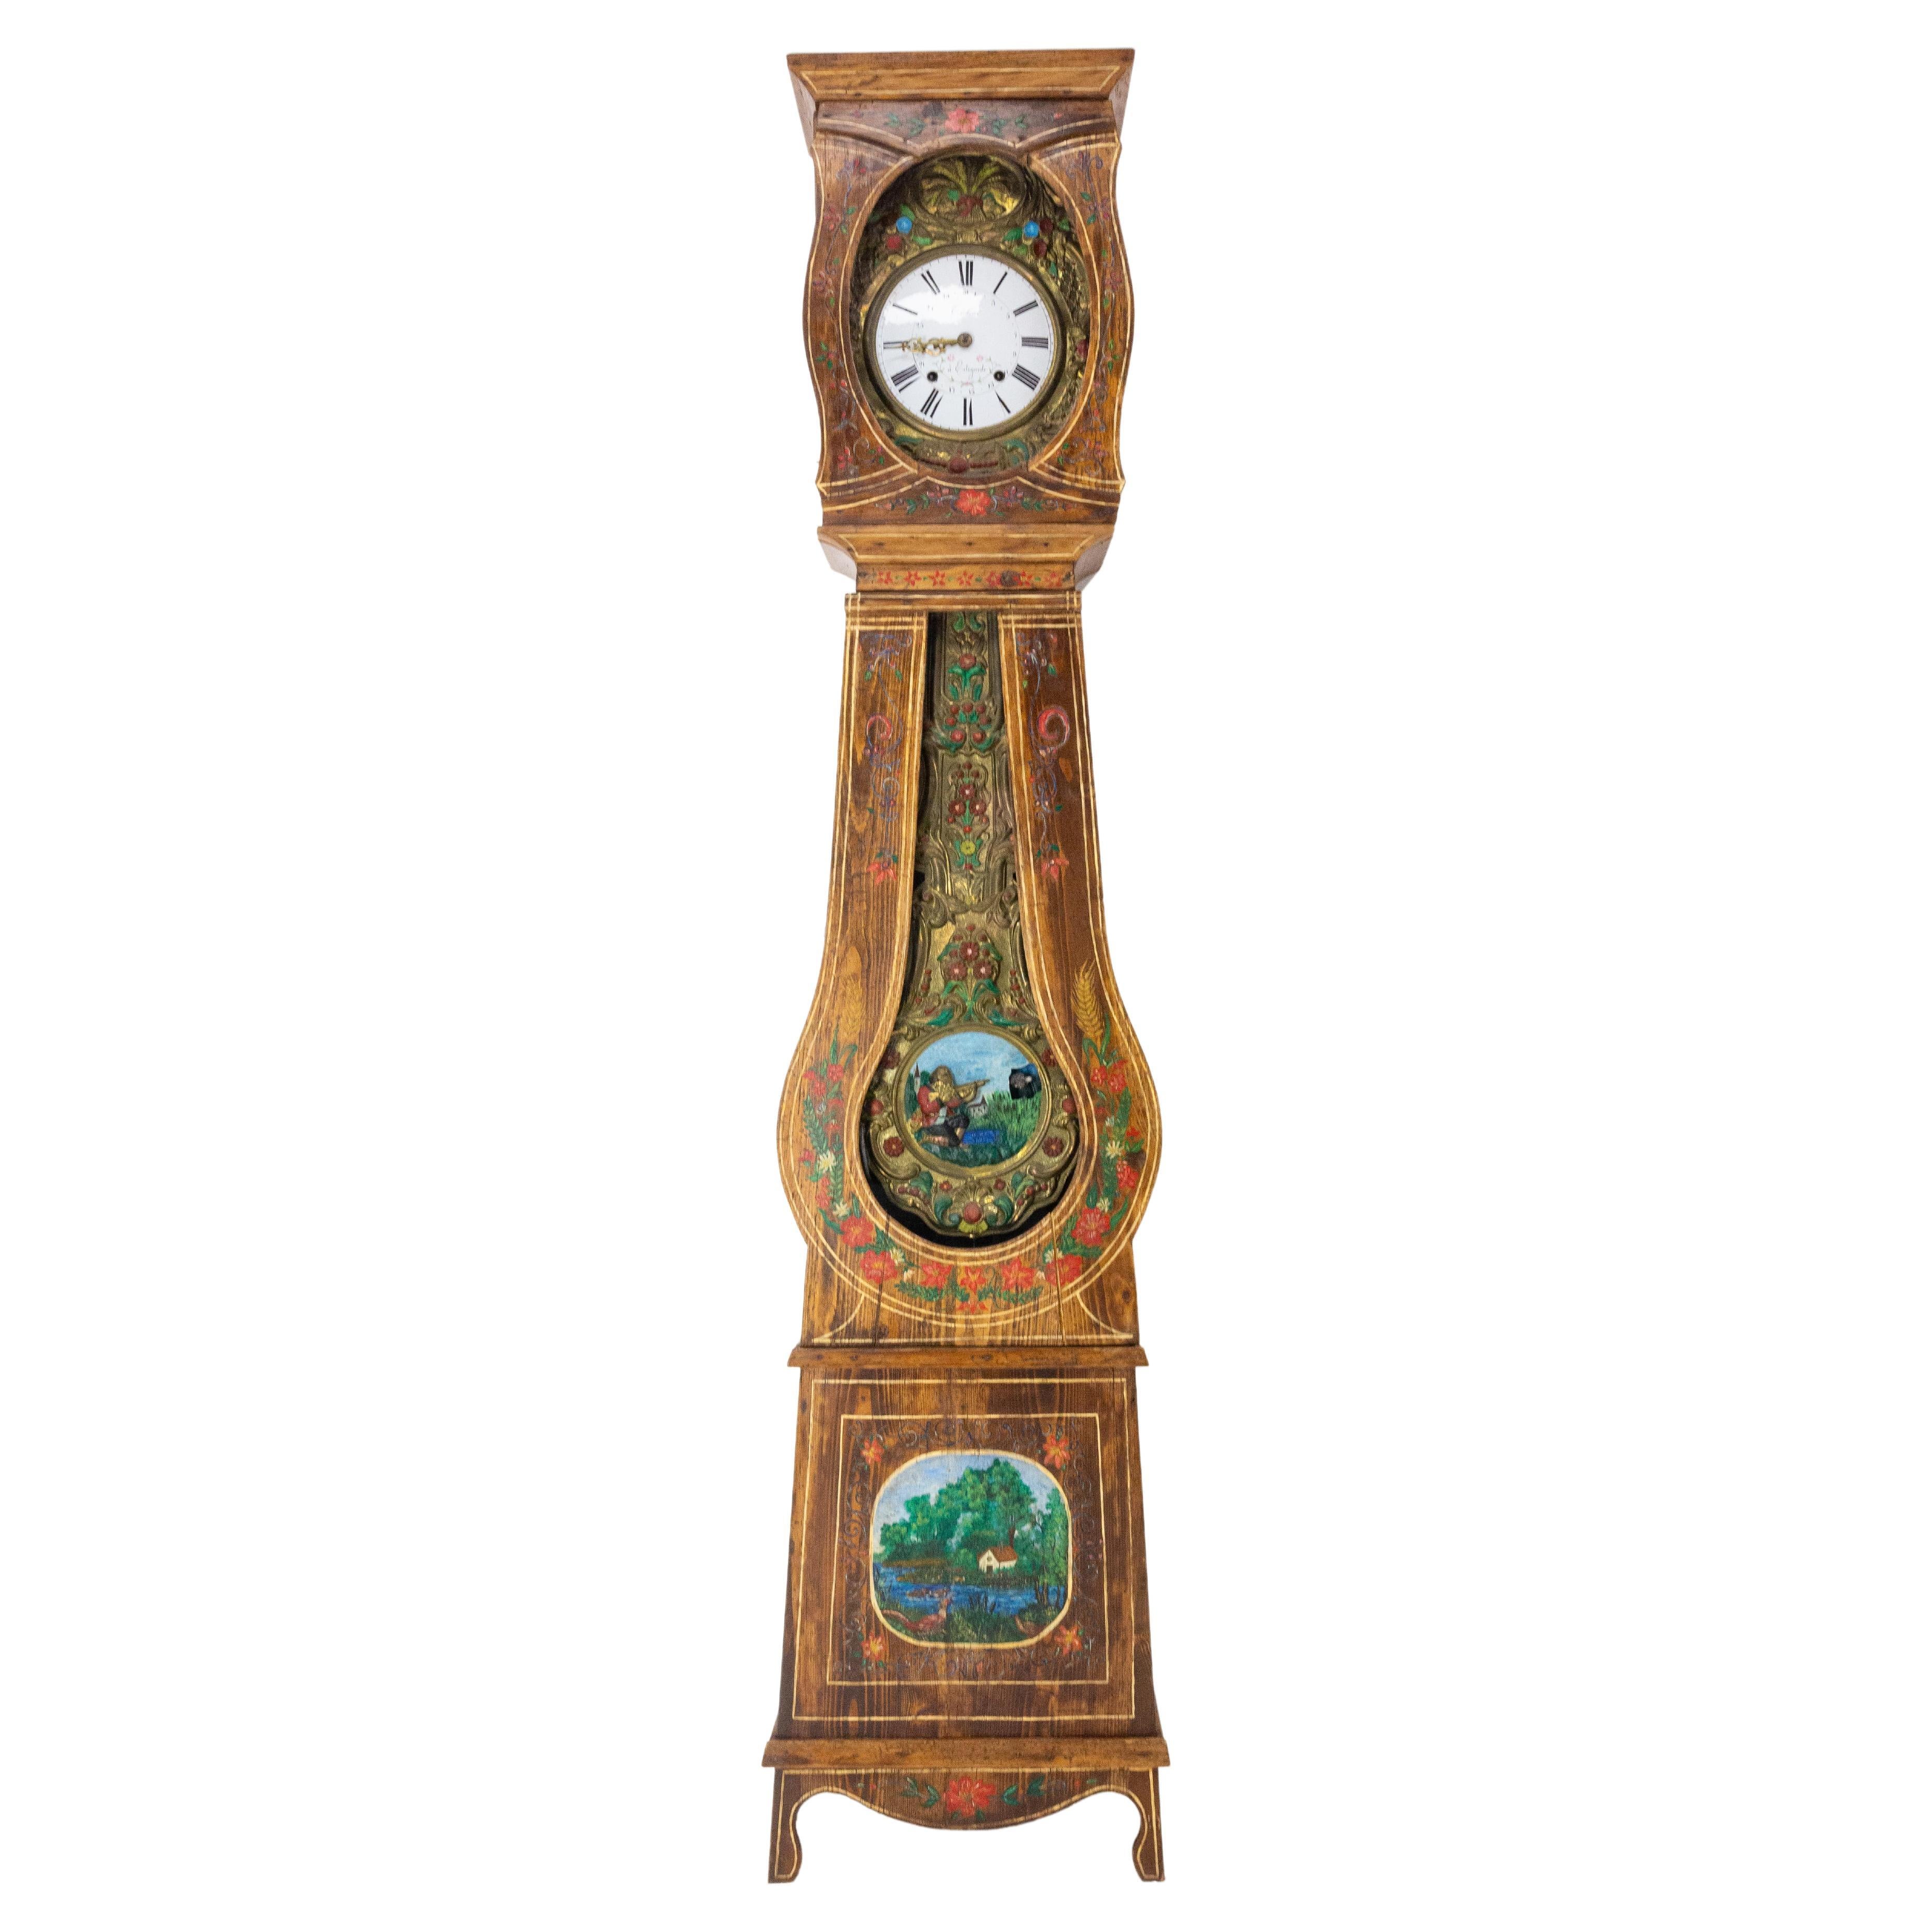 19th Century French Empire Comtoise or Grandfather Clock with Hunting Scene